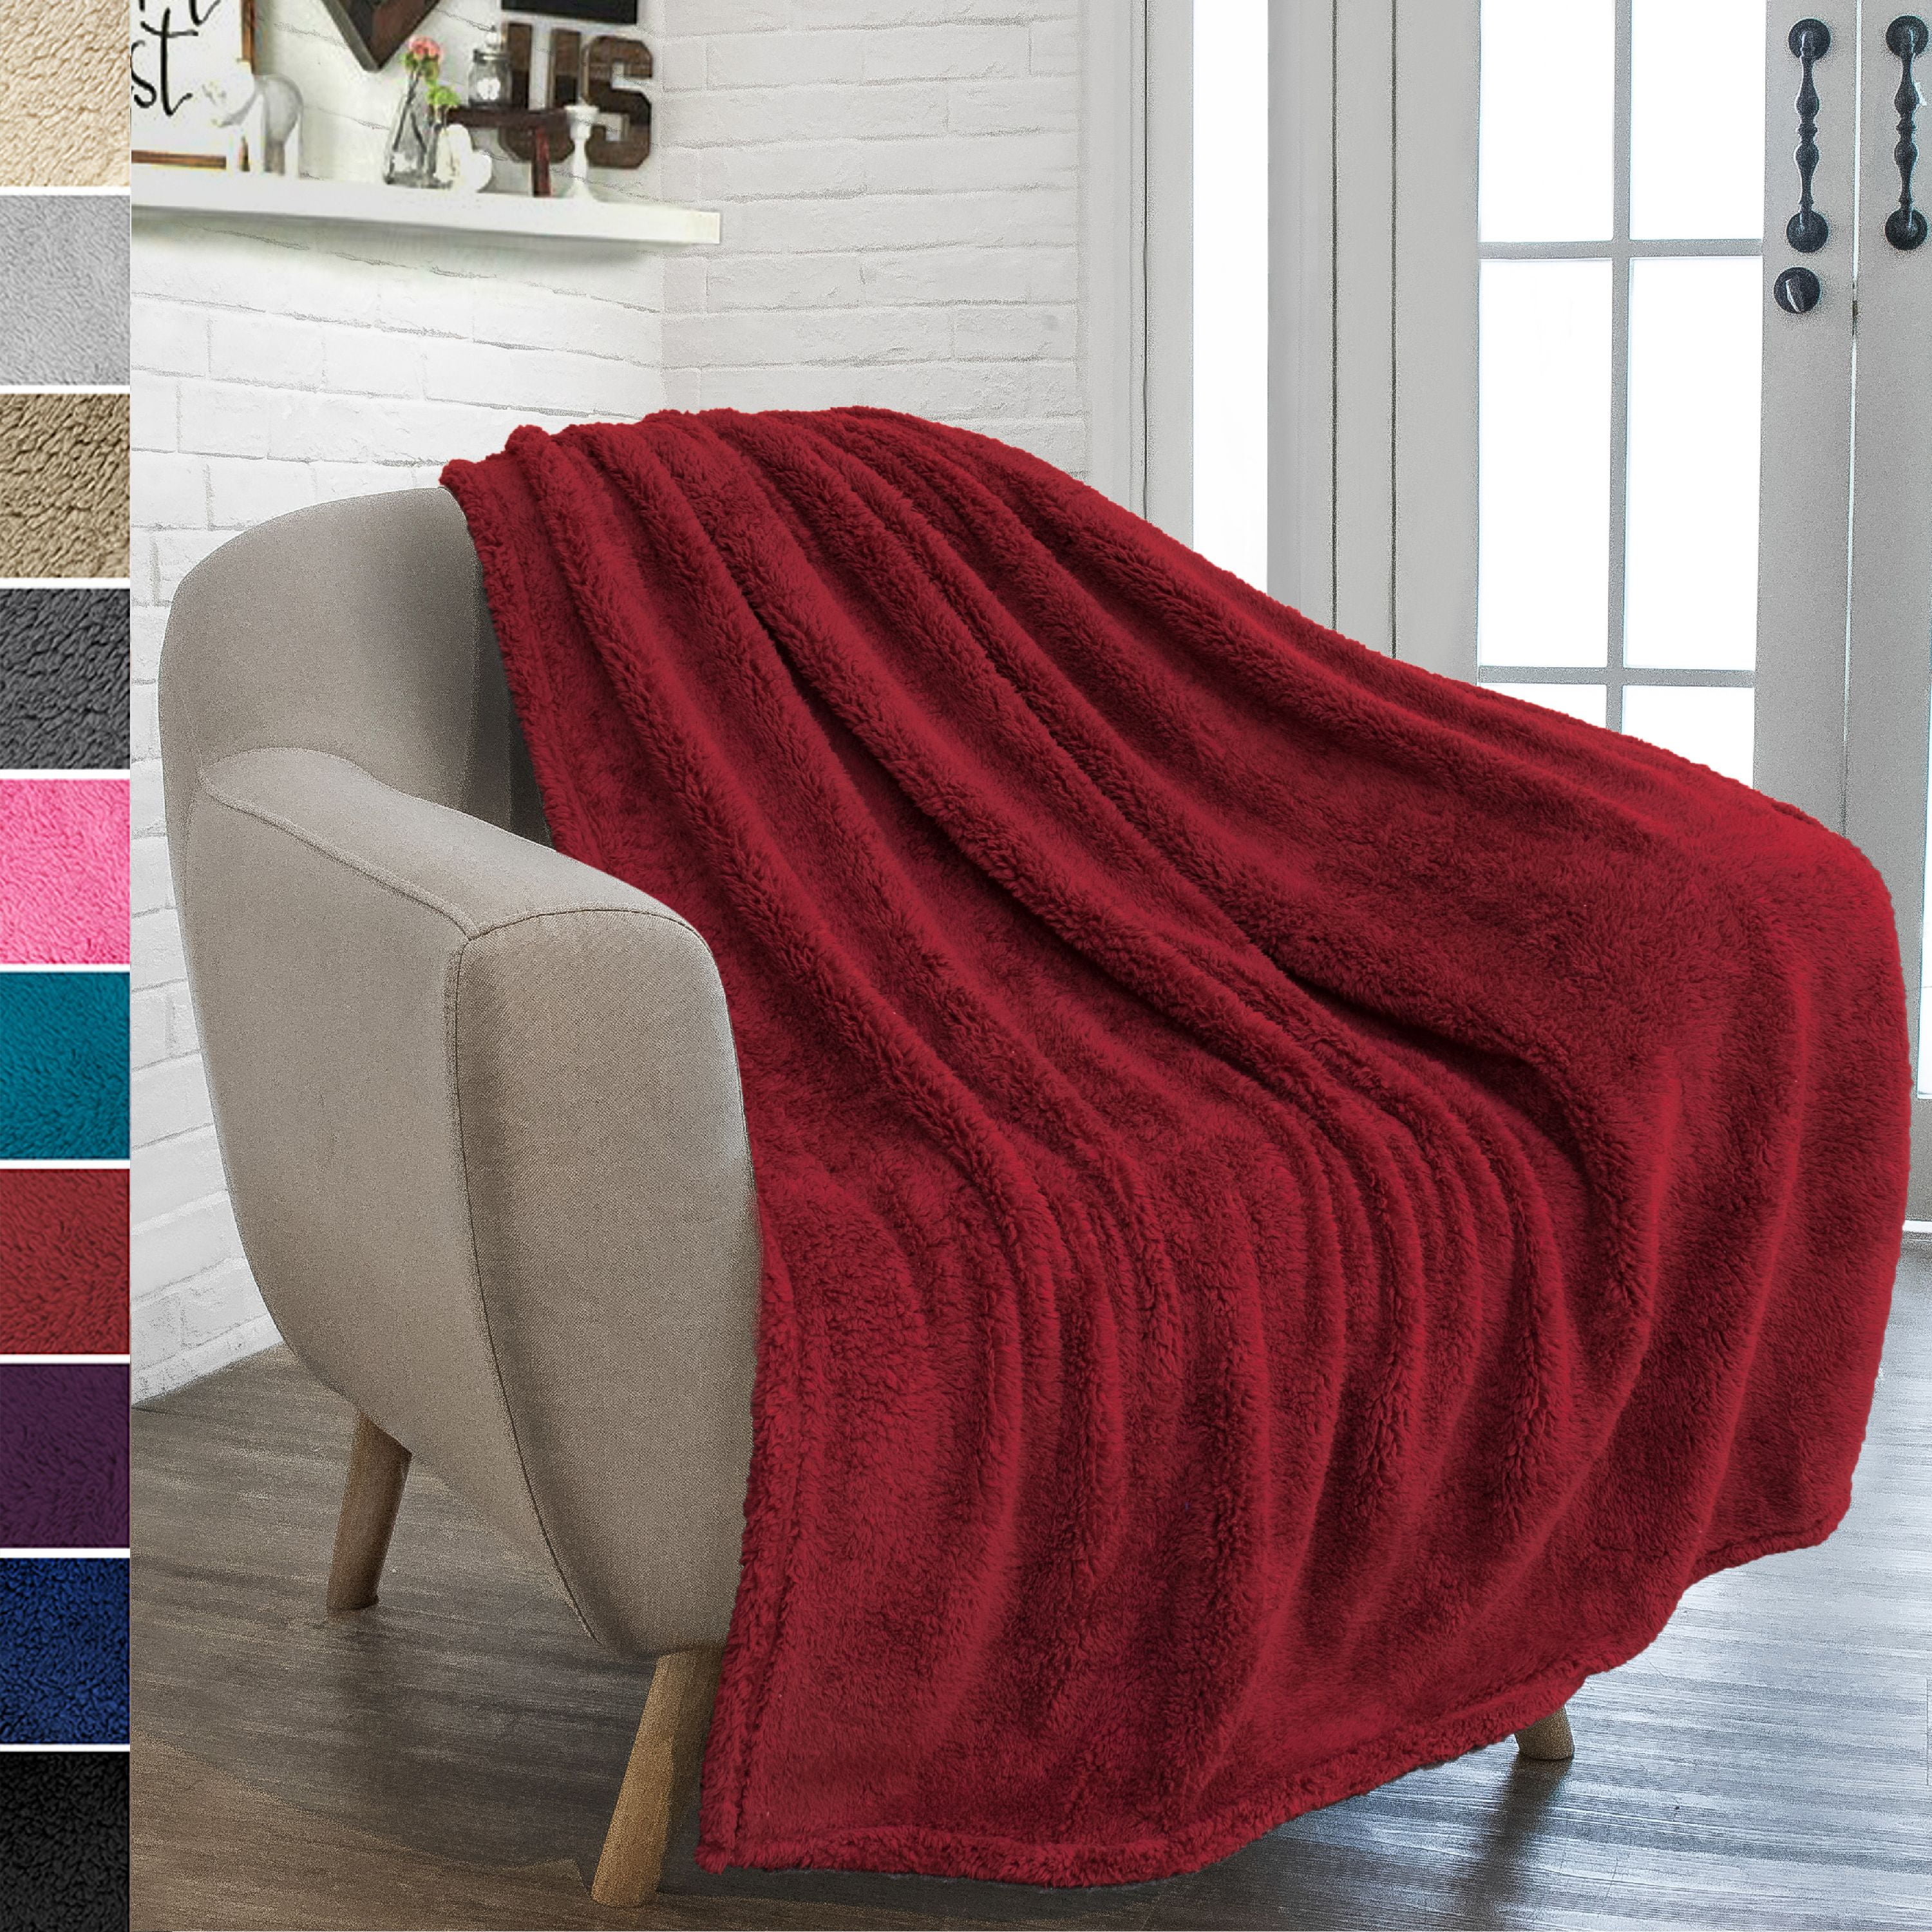 Blankets Ultra-Soft Flannel Throw Blanket Warm Fuzzy Lightweight Blanket,Fluffy Cozy Plush Fleece Comfy Blanket for Couch Sofa Bed 80X60 